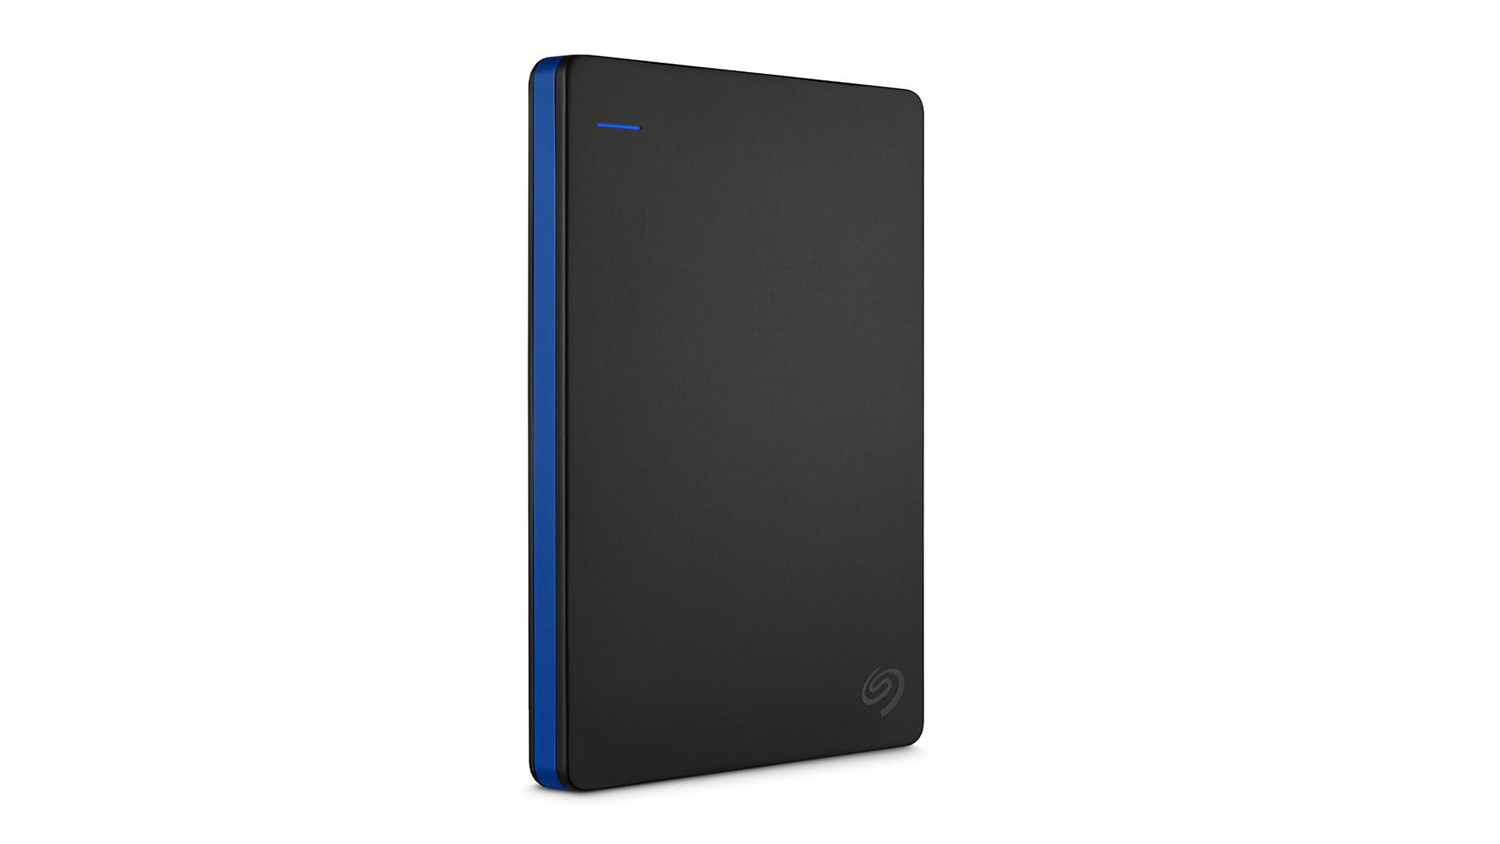 seagate for ps4